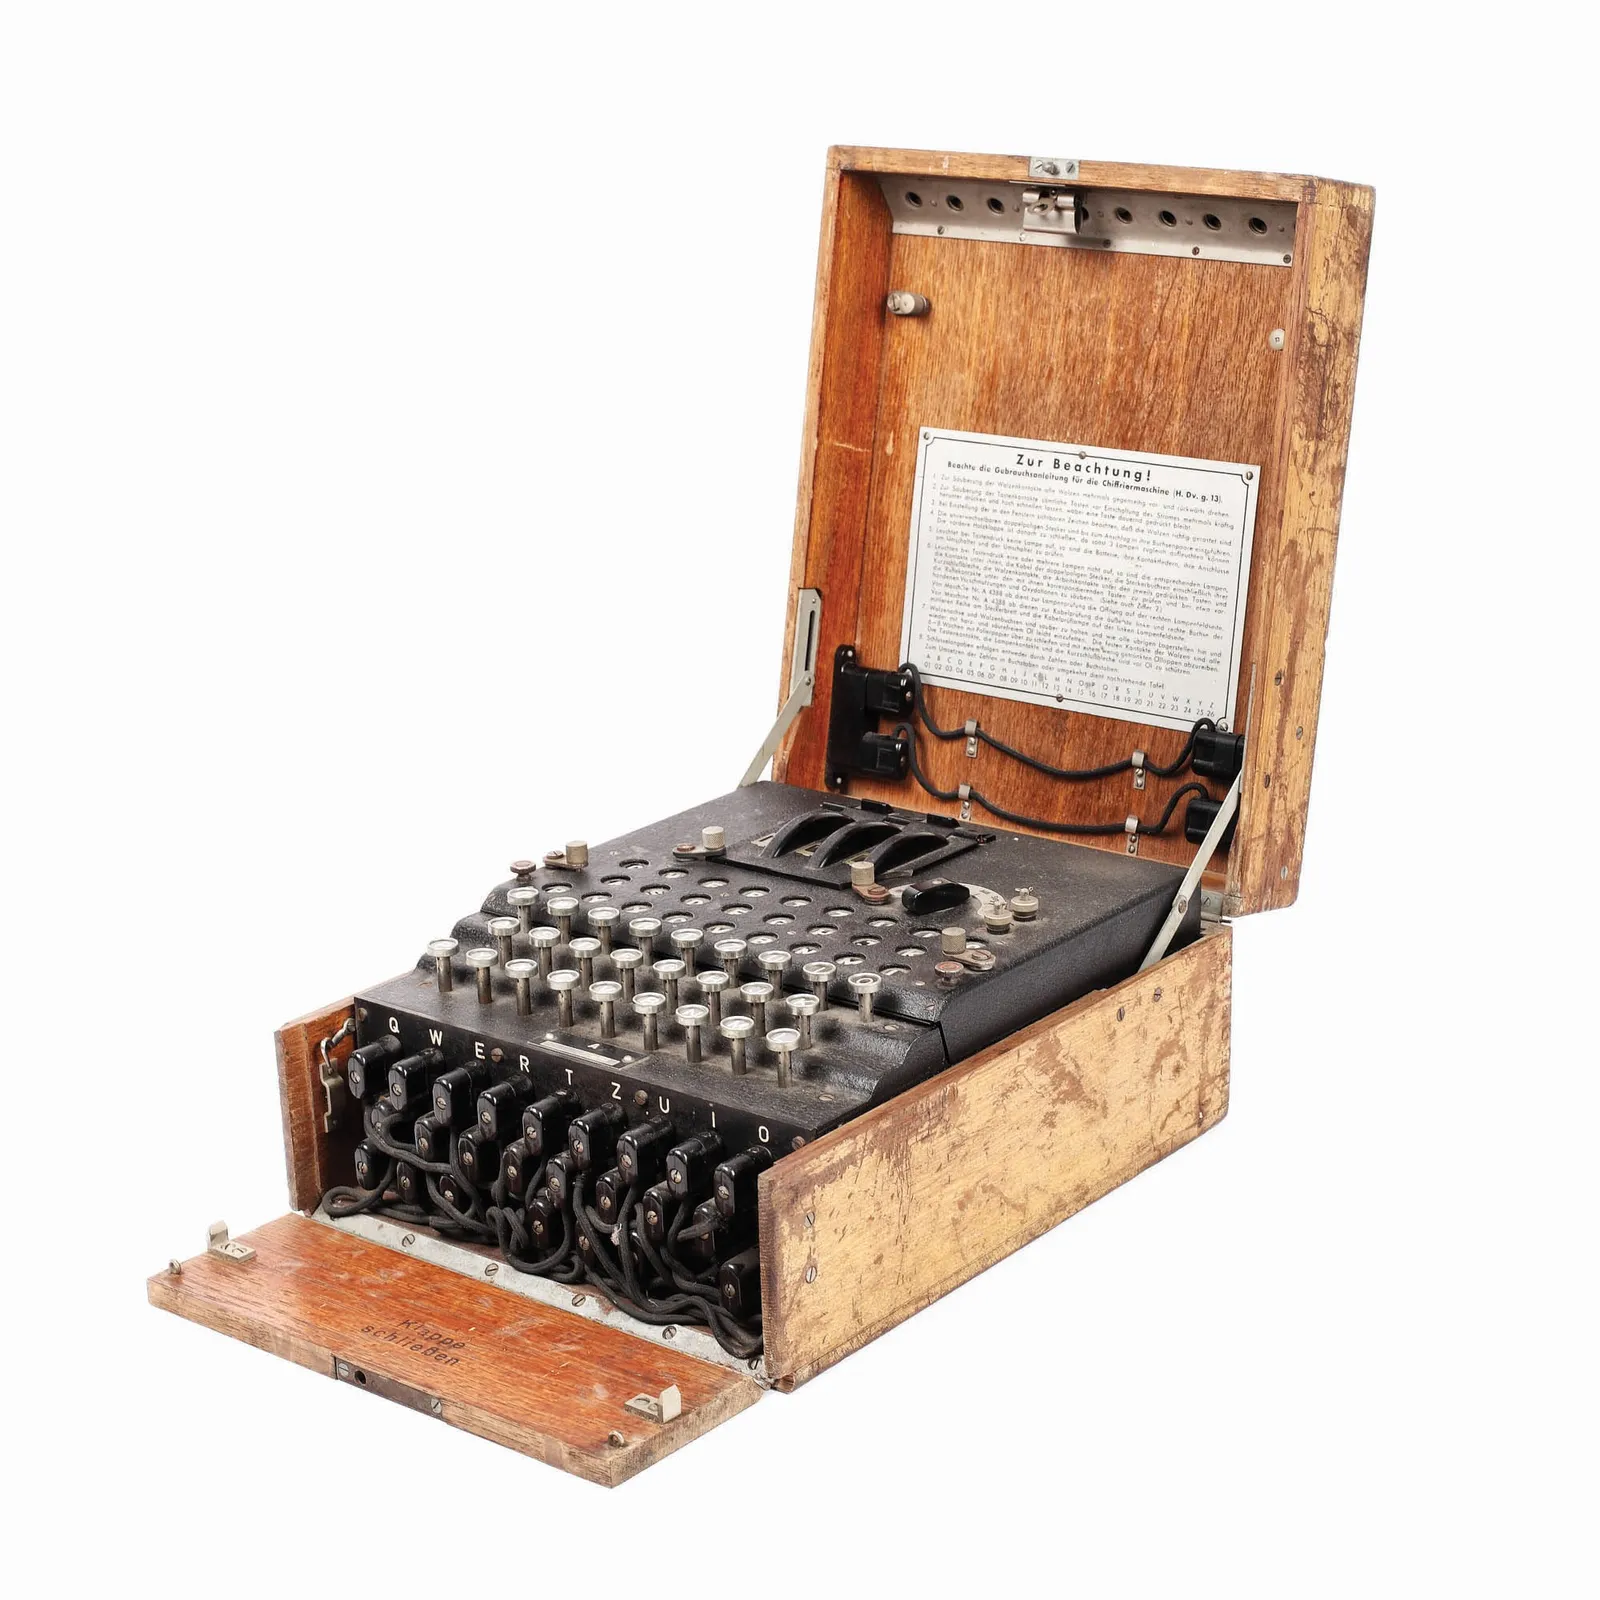 Enigma machine goes on display at The Alan Turing Institute